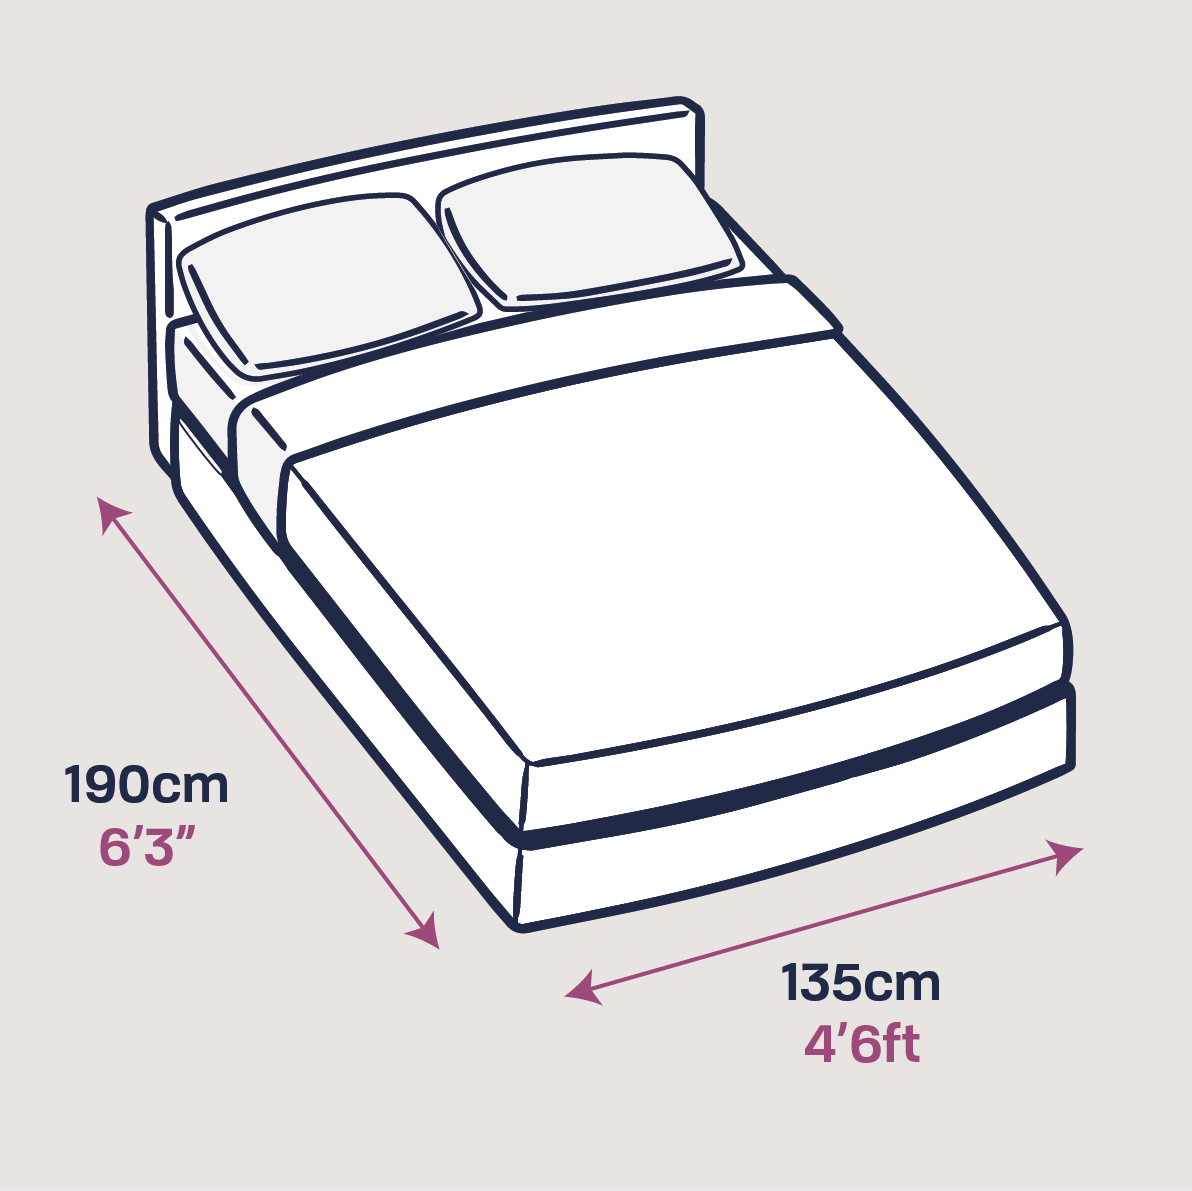 double size bed